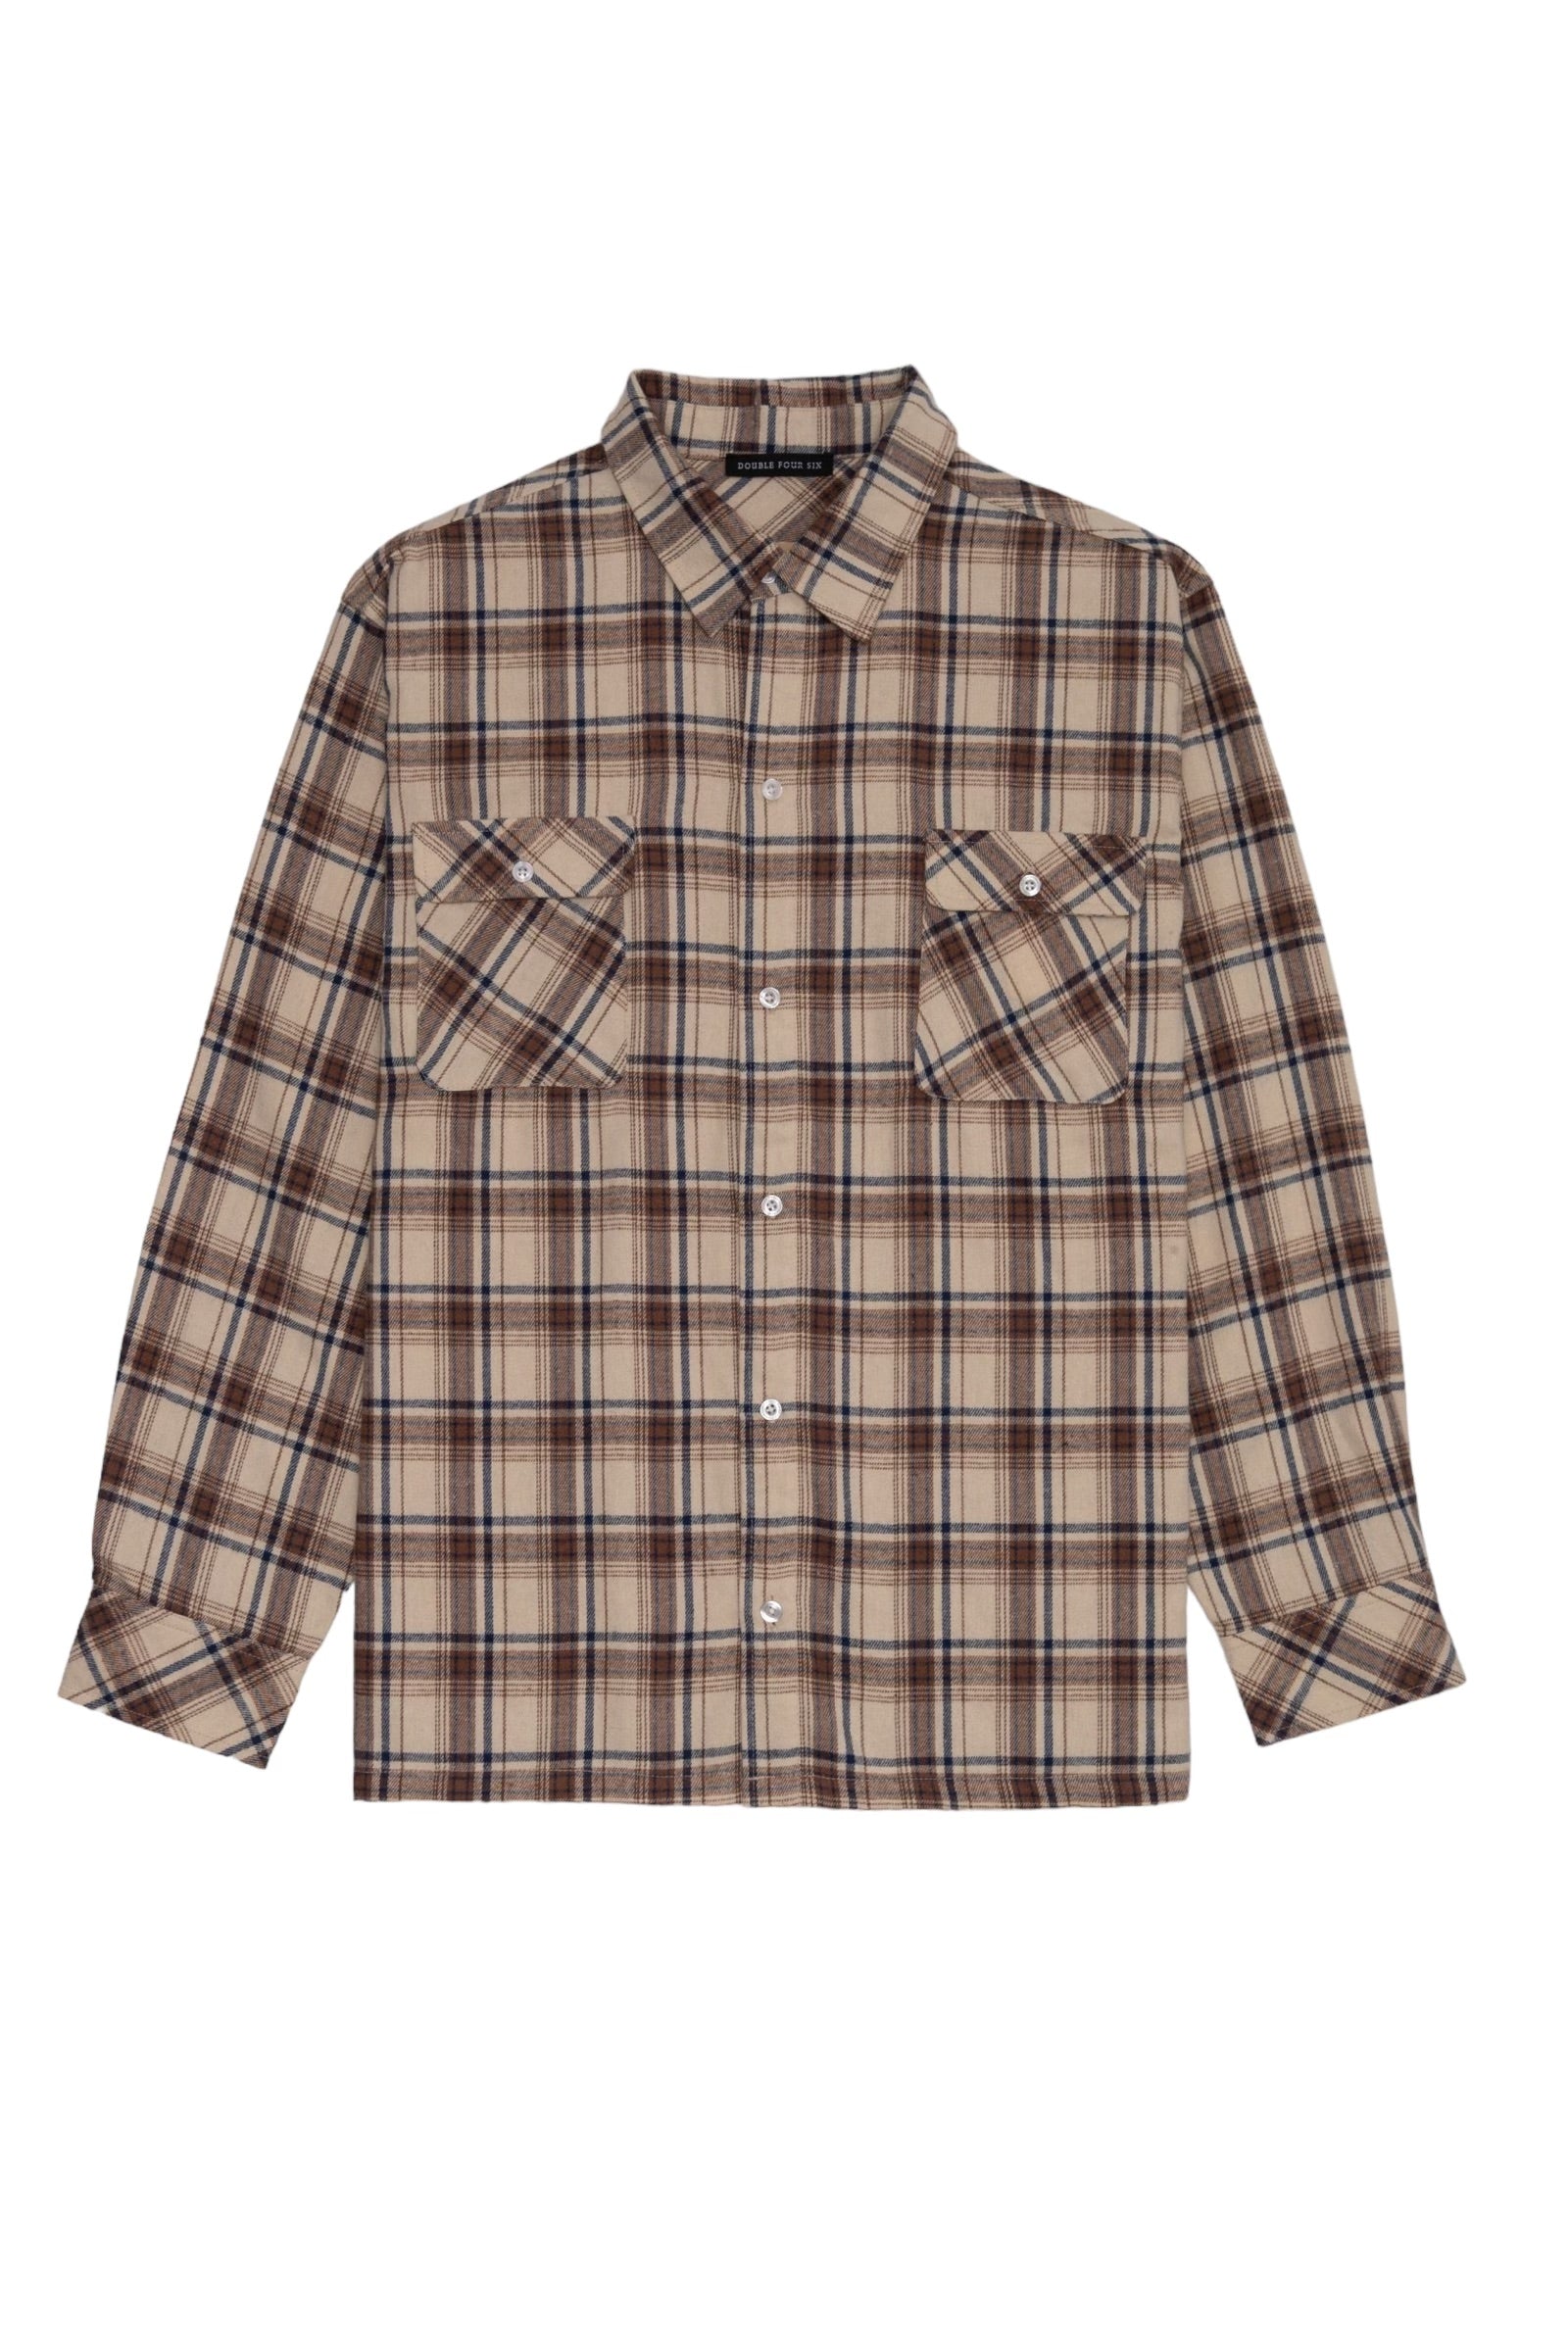 DOUBLE FOUR SIX- Back Logo Checked Shirt Beige Check – 446 ...